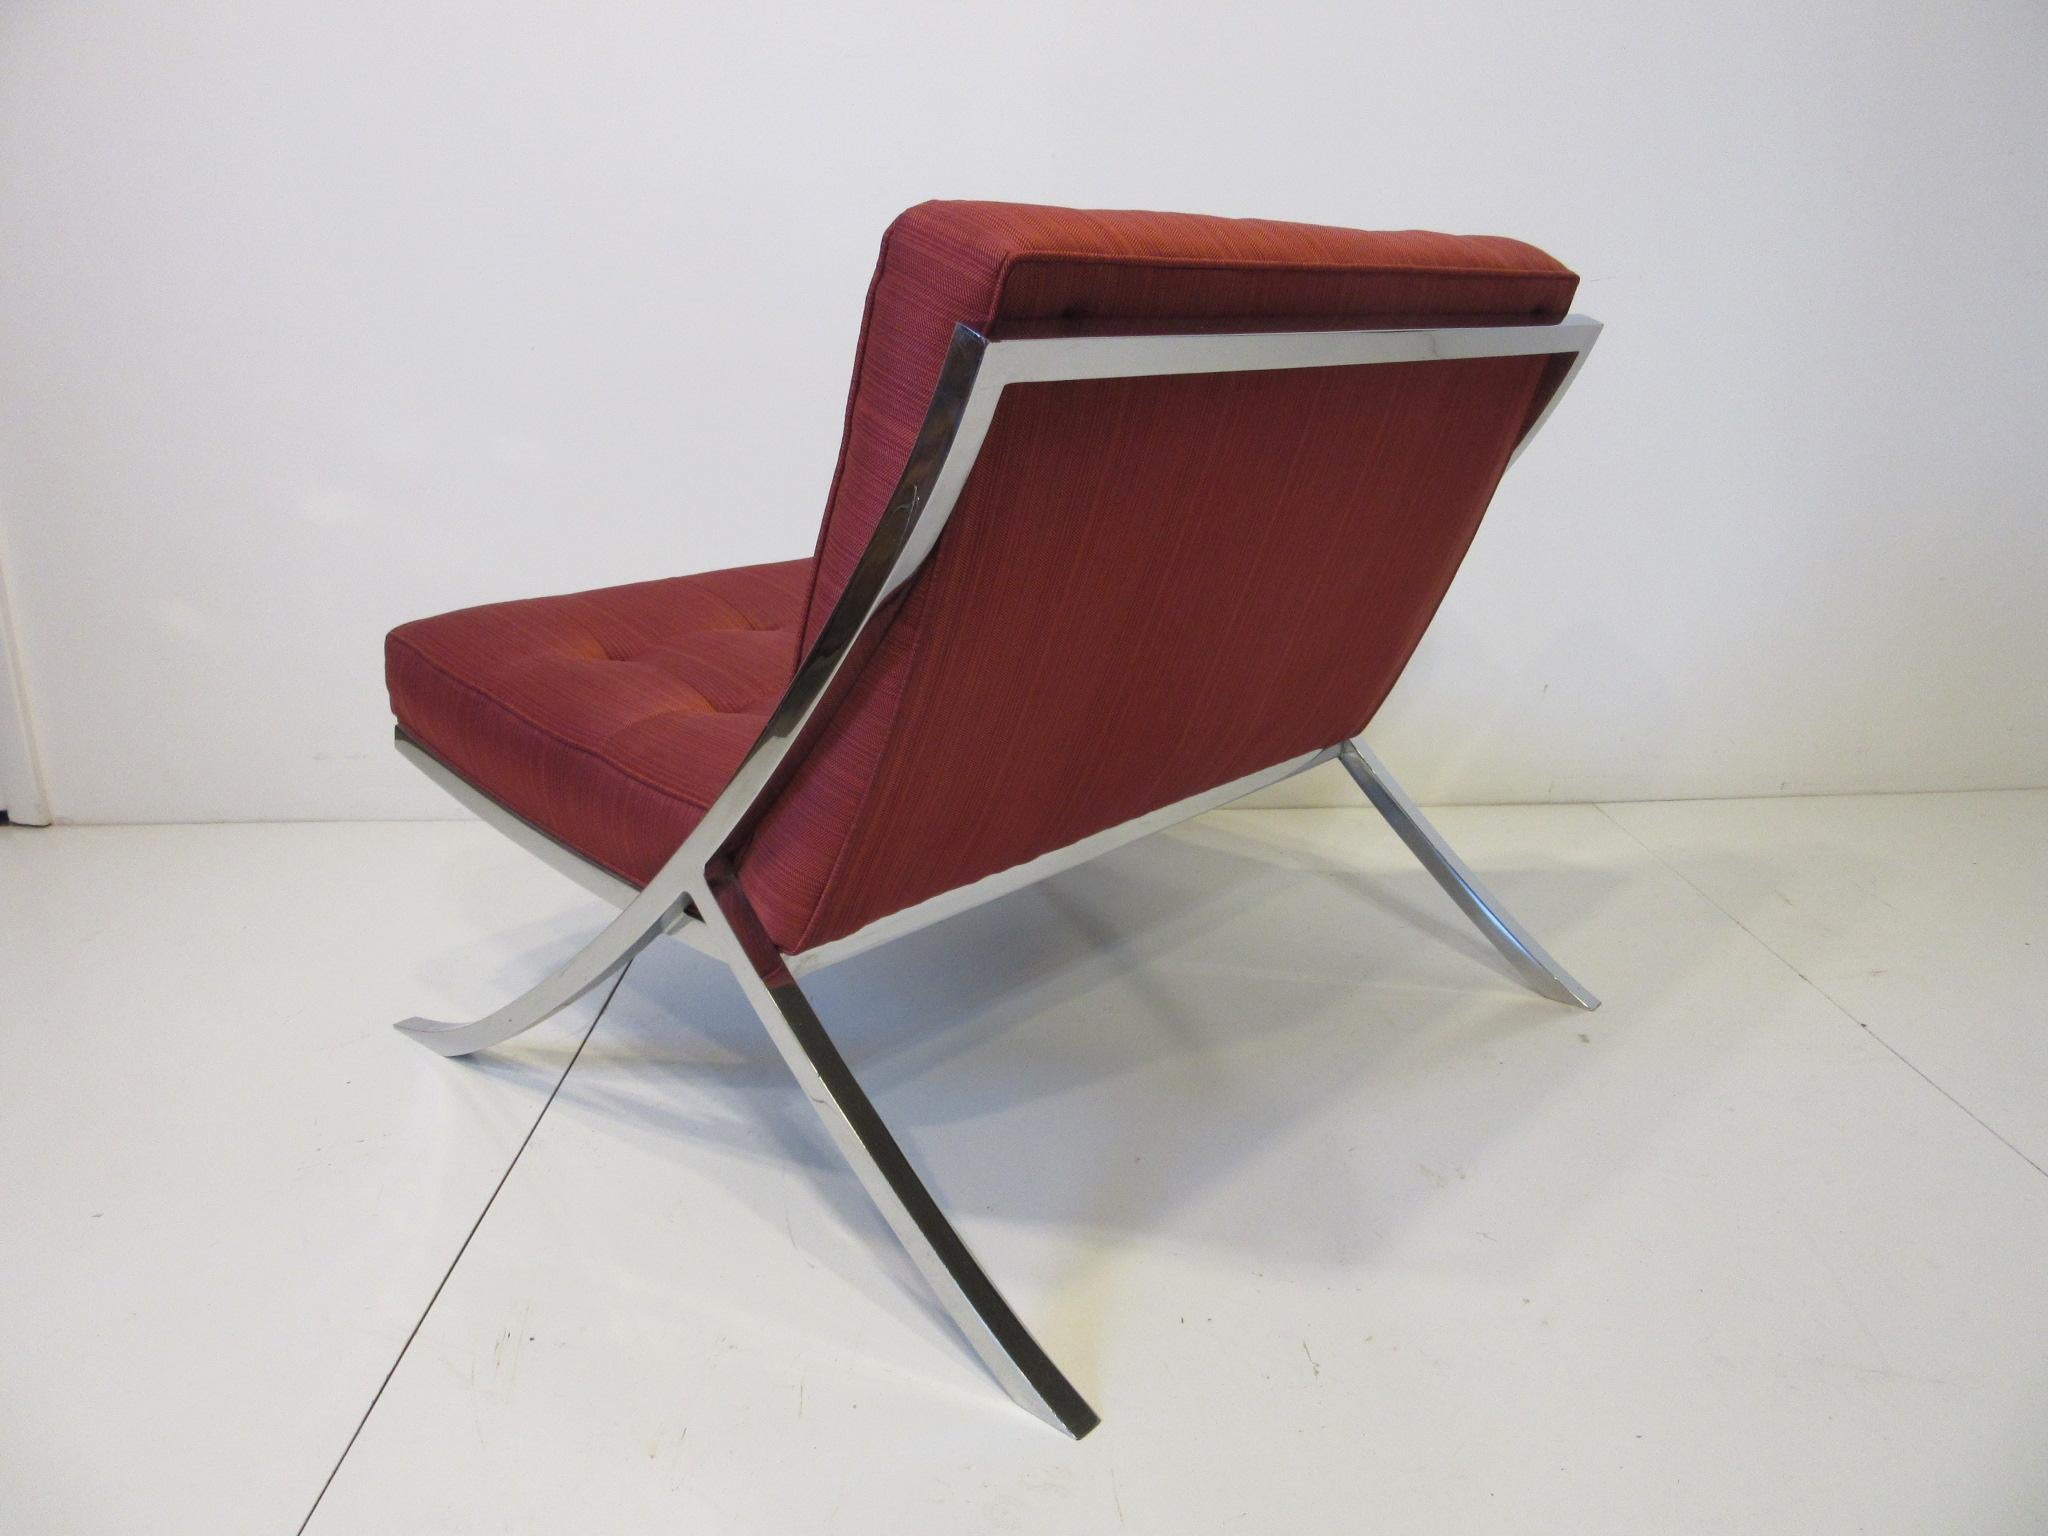 American 1970 Chromed Upholstered Saber Leg Lounge Chairs in a Knoll Barcelona Style  